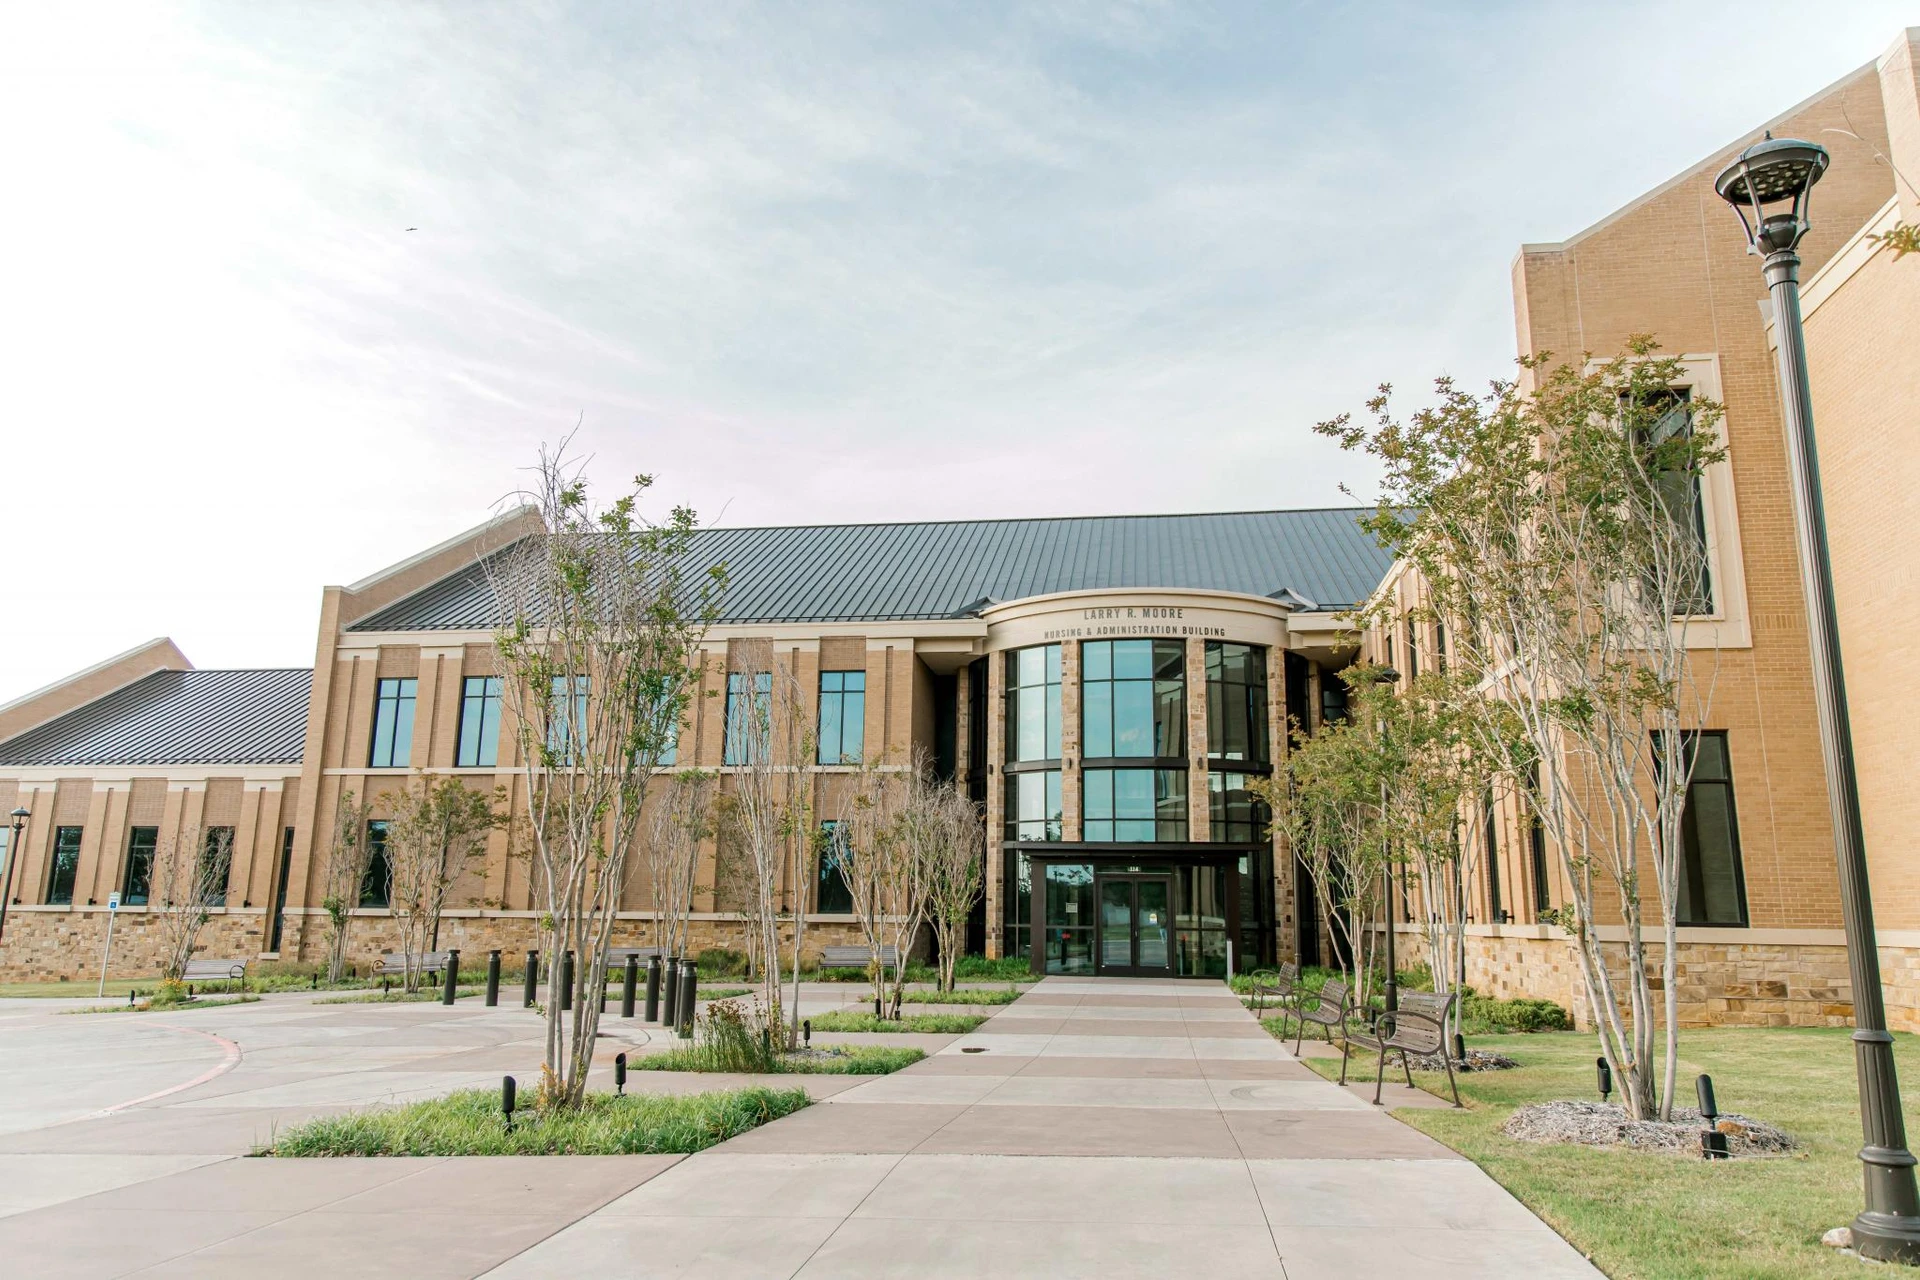 A wide sidewalk, with small trees and benches on the side, lead up to the doors of the new nursing and administration building named Larry R. Moore.